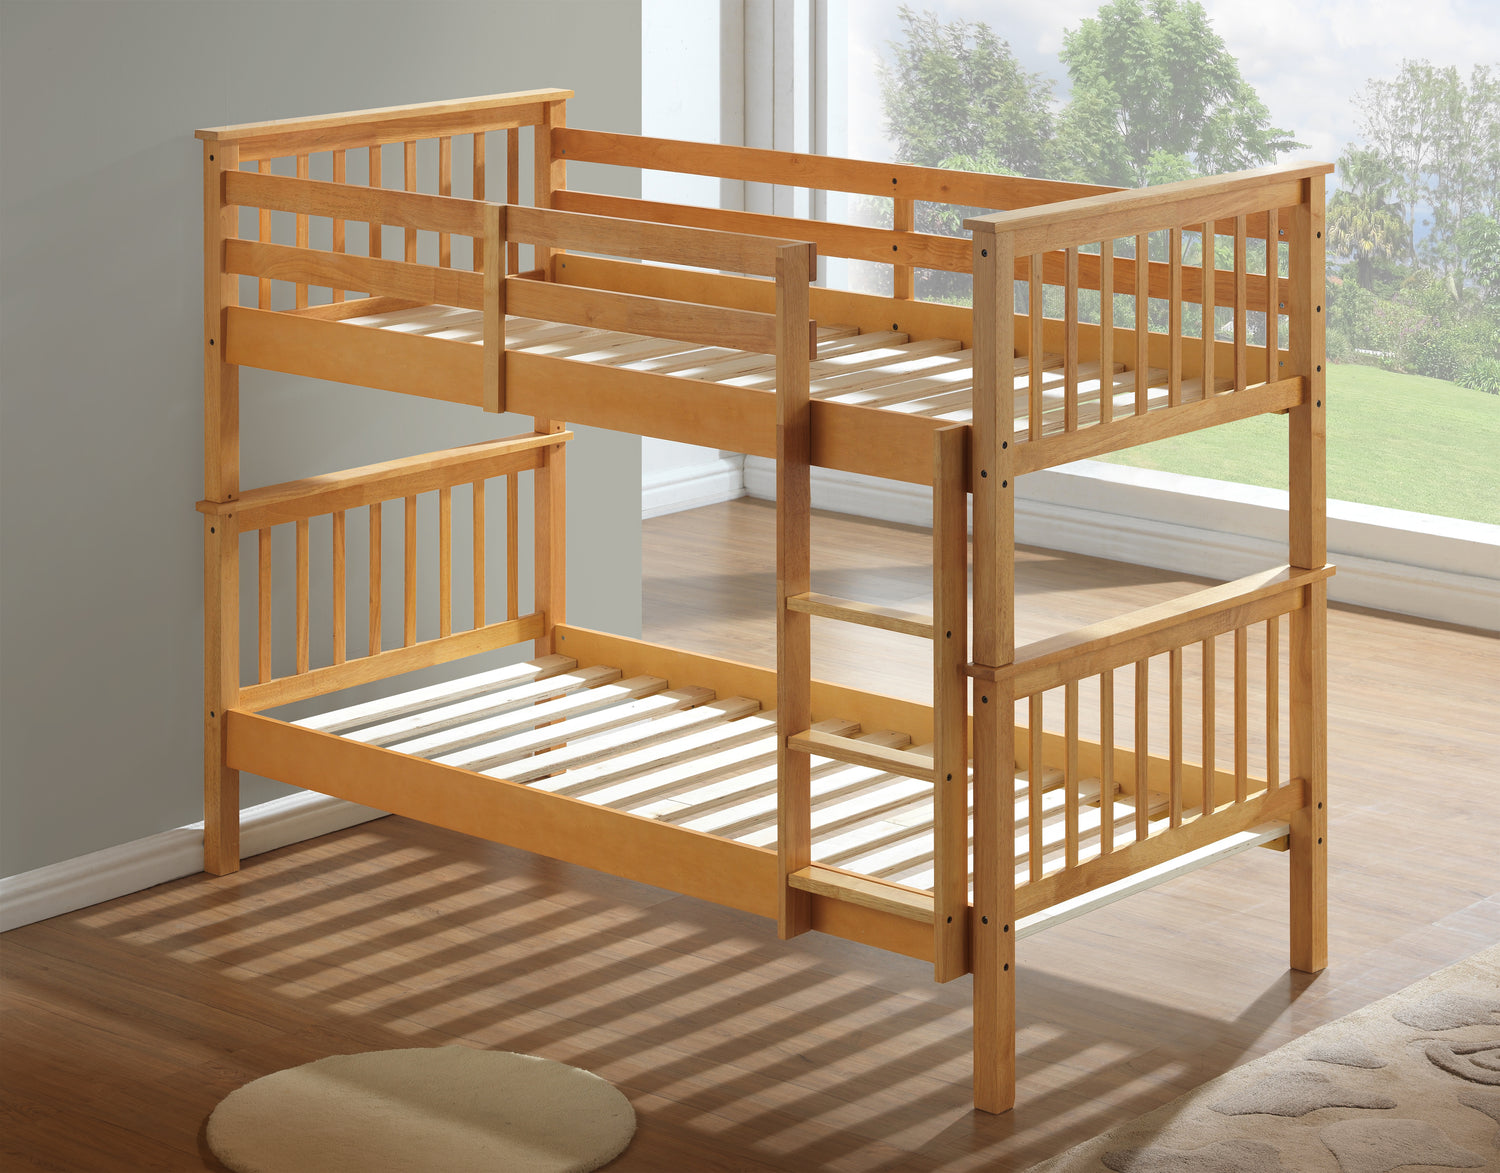 Artisan Bed Company New Bunk Bed